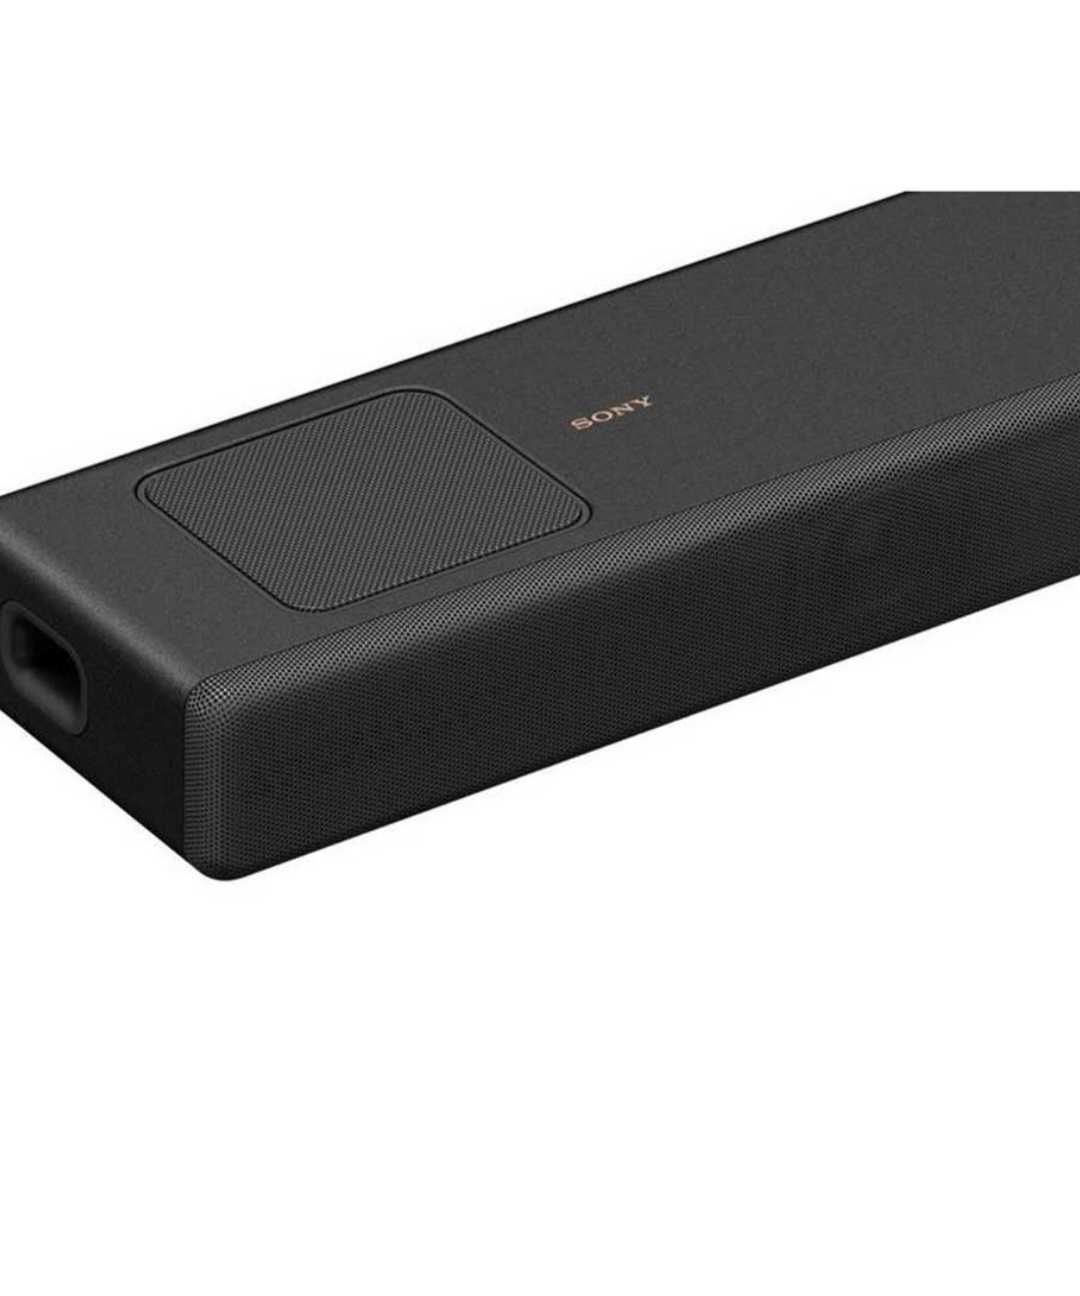 SONY HT-A5000 5.1.2 All-in-One Sound Bar с Dolby Atmos